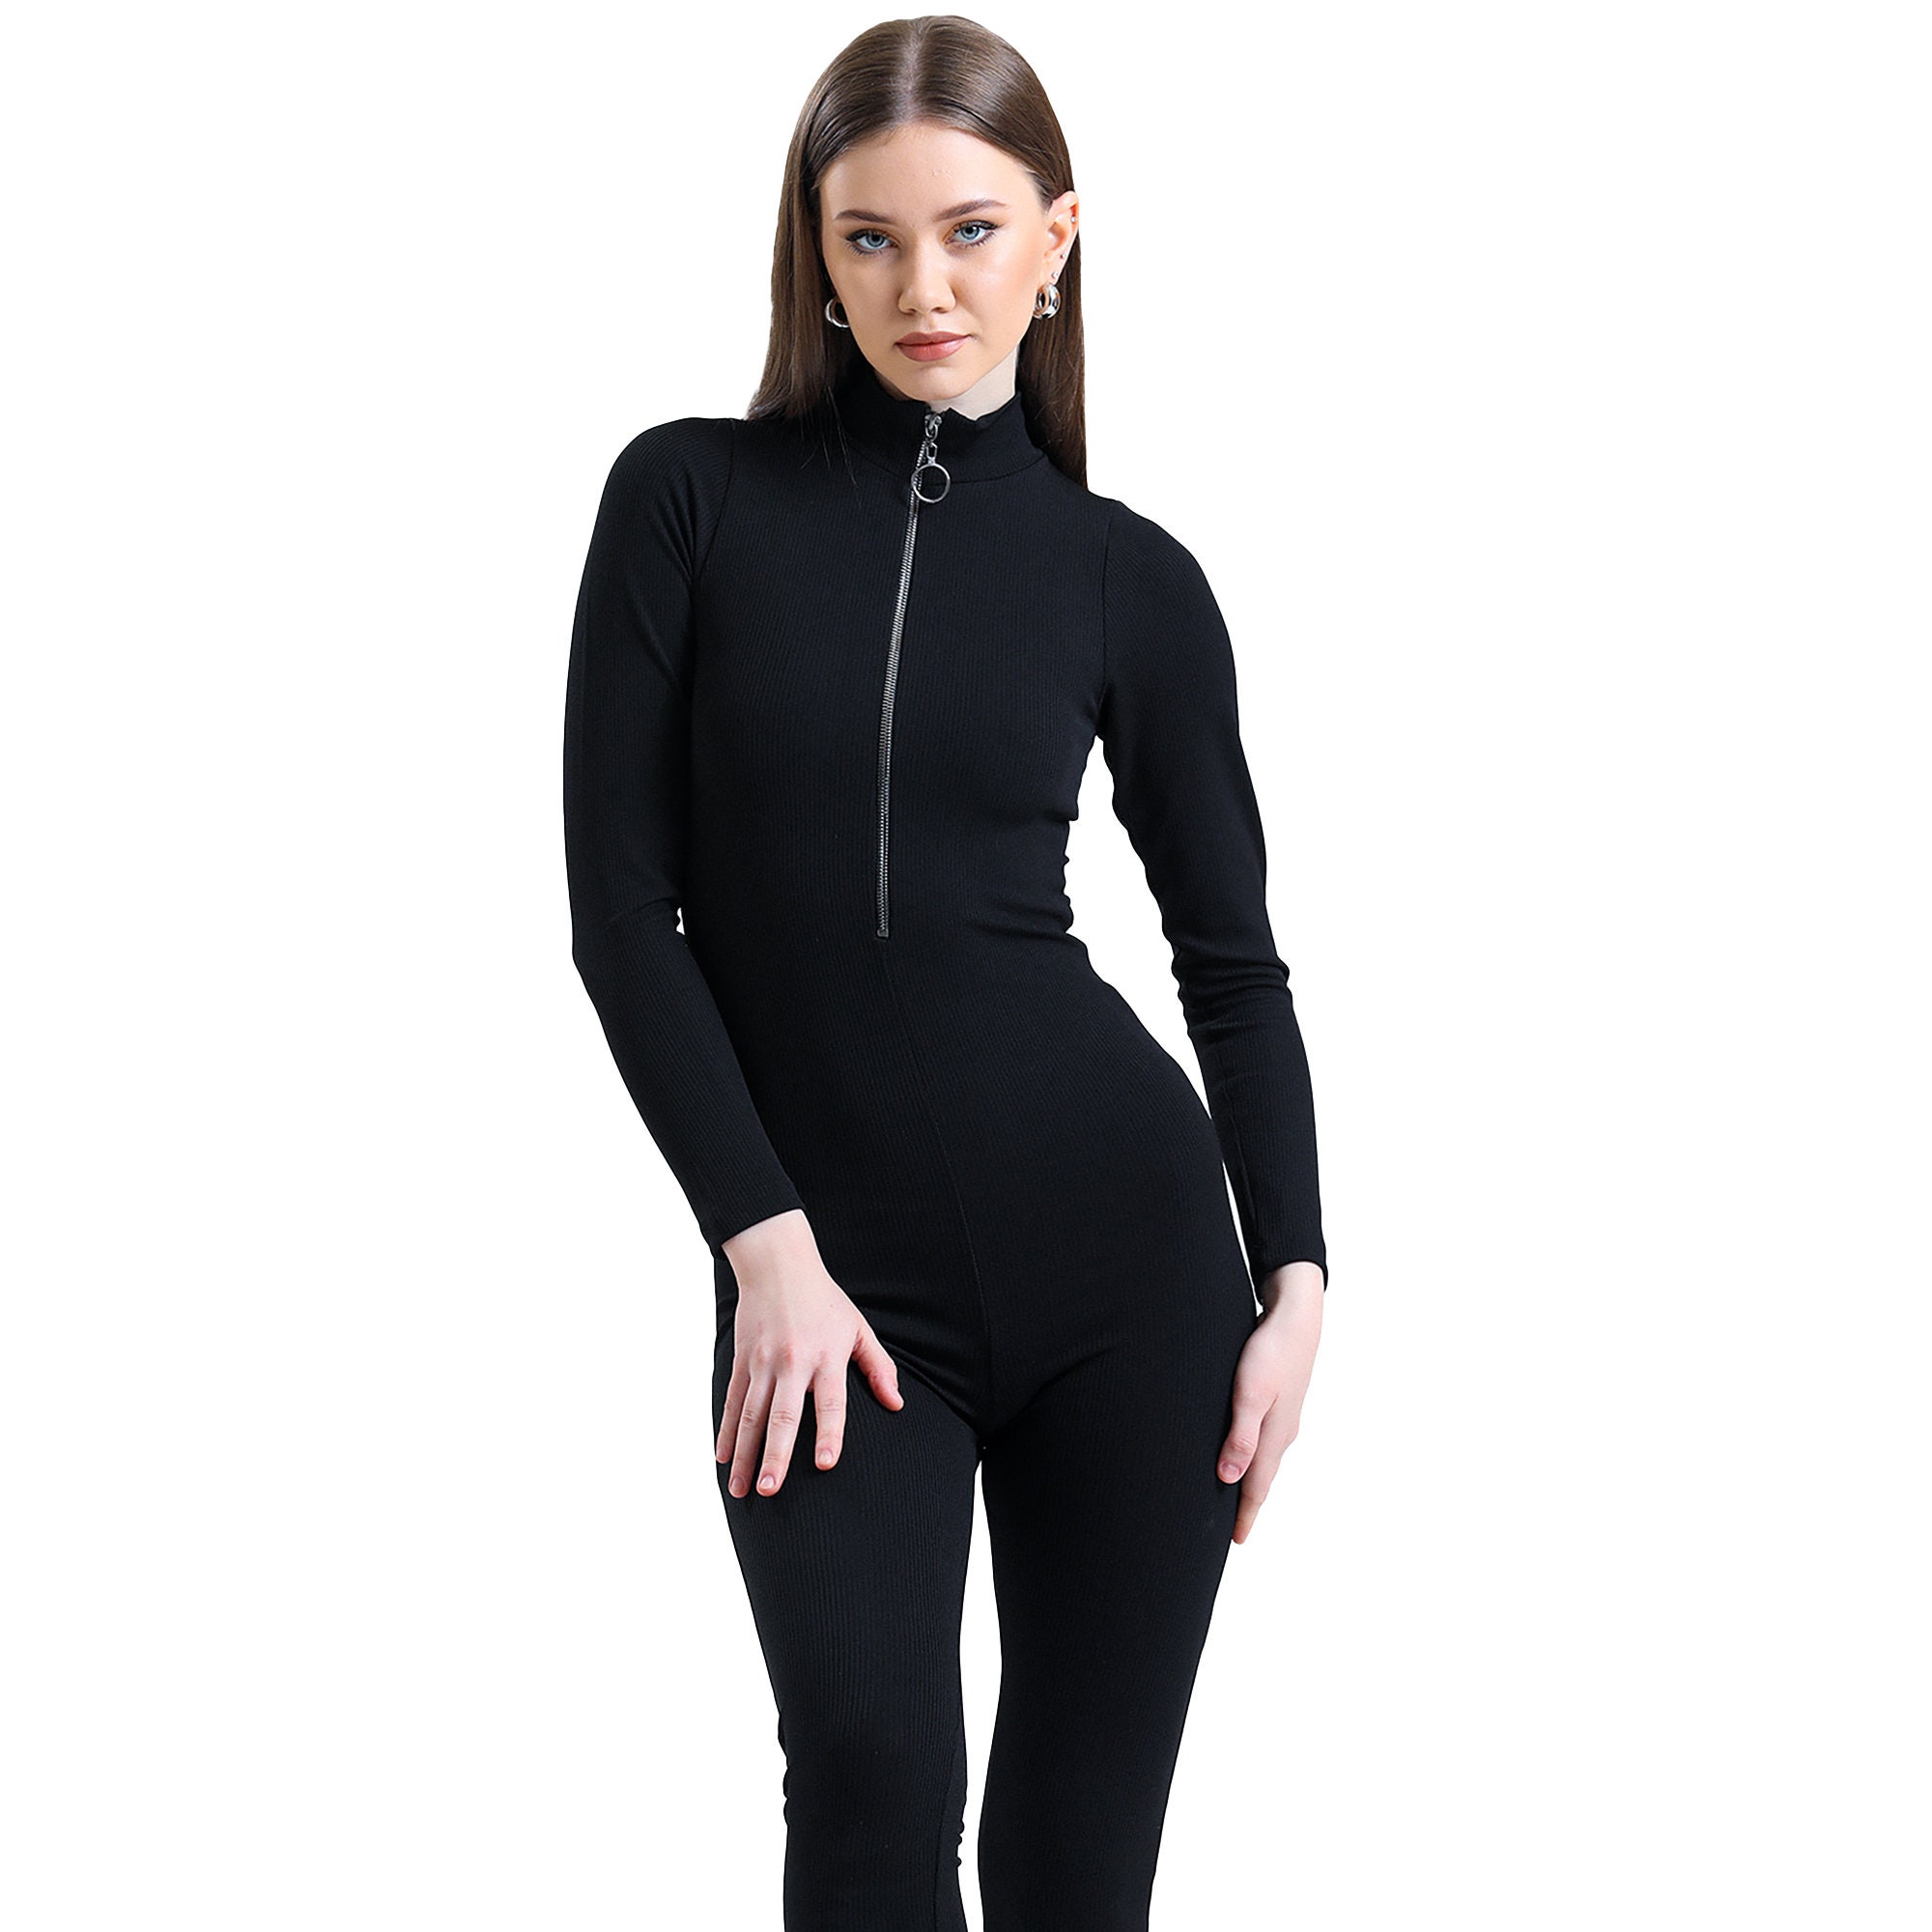 Womens One Piece Jumpsuit Long Sleeve Solid Bodycon Romper Pants